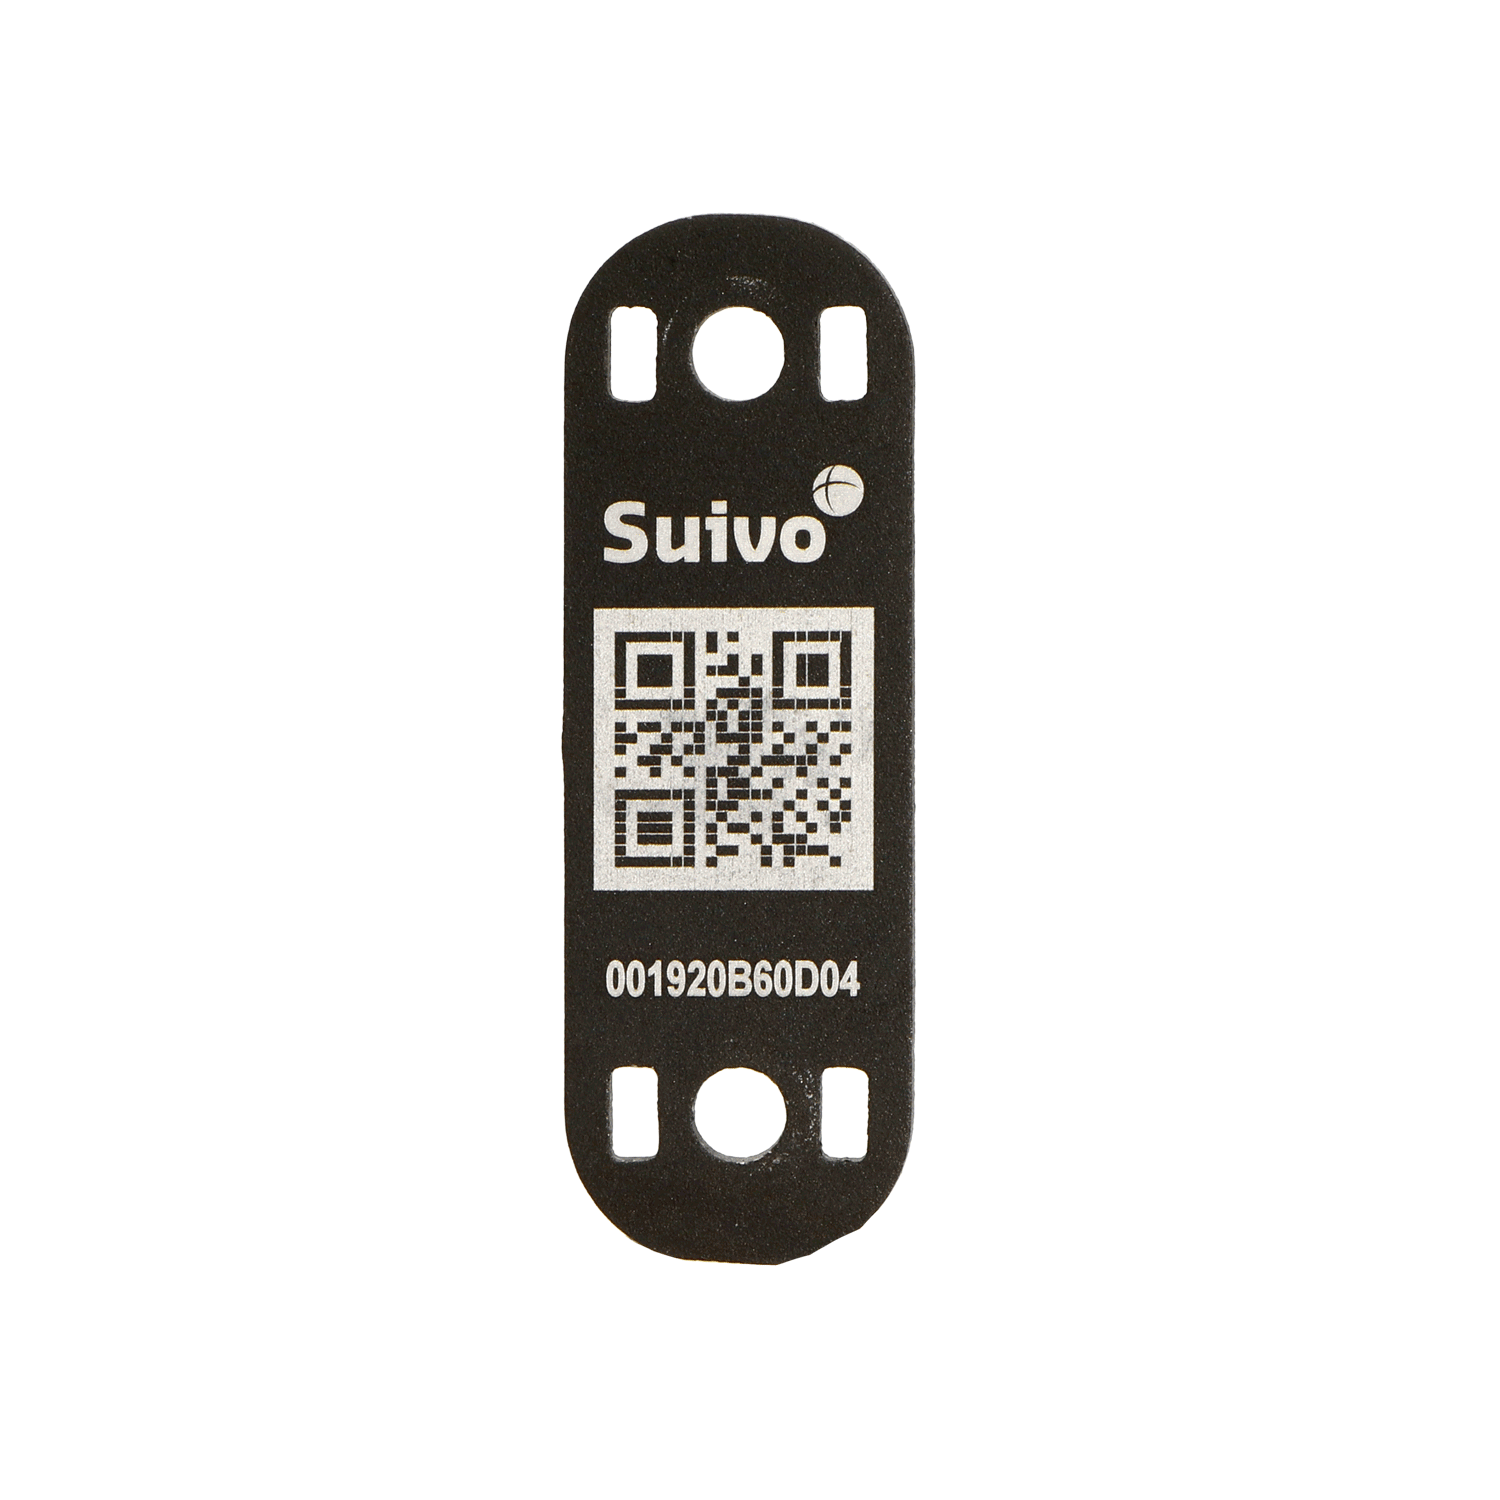 suivo pqrh tag with nfc